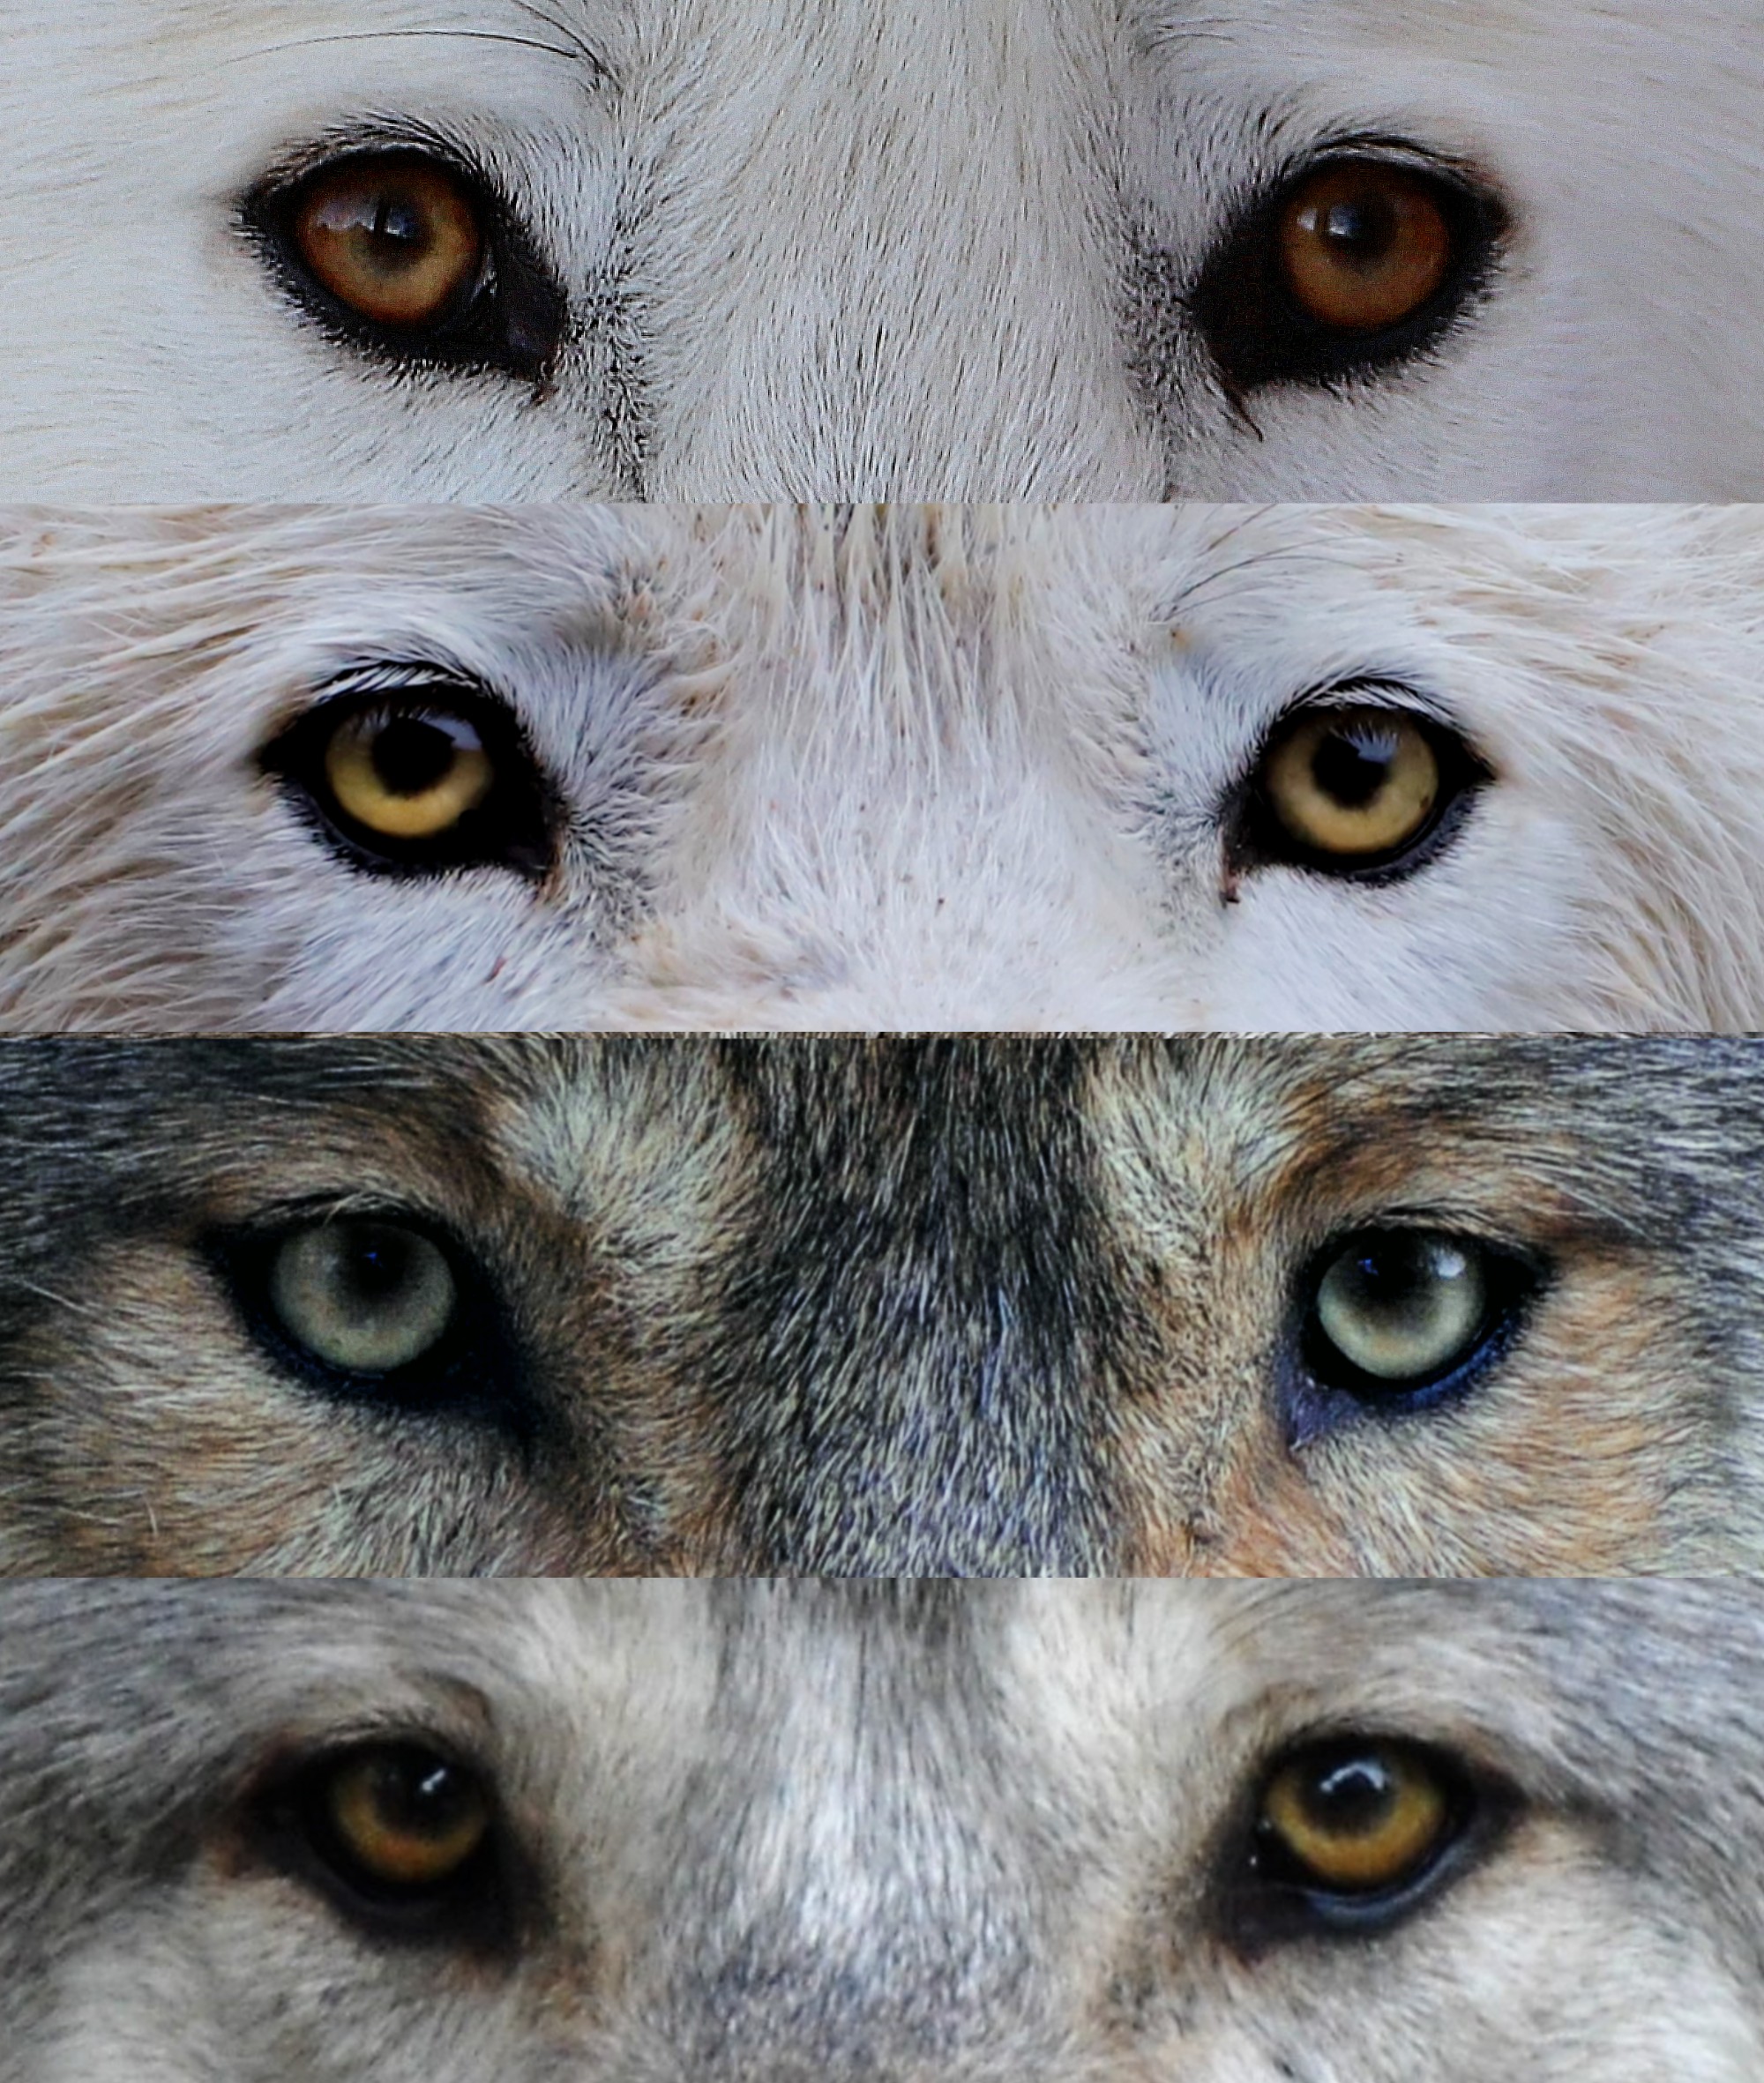 What is the most common eye color for wolves?